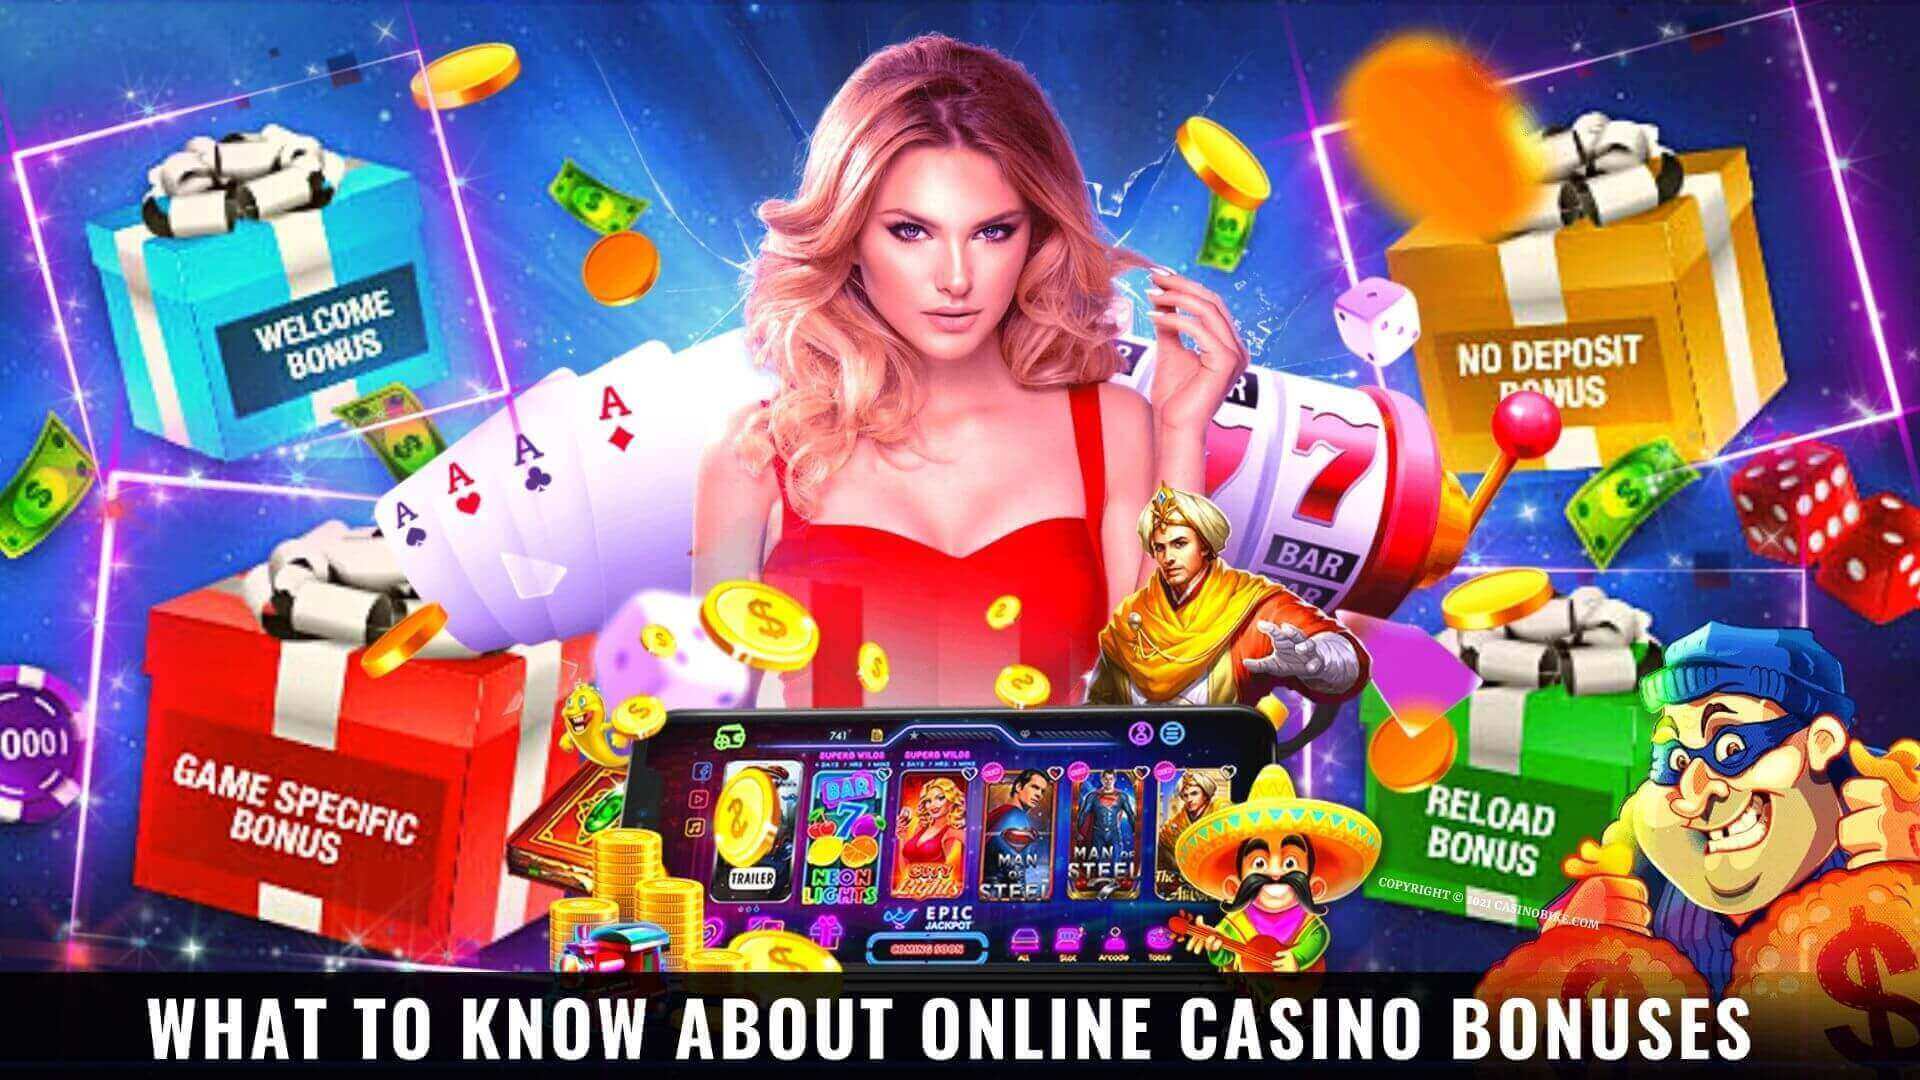 What to know about online casino bonuses